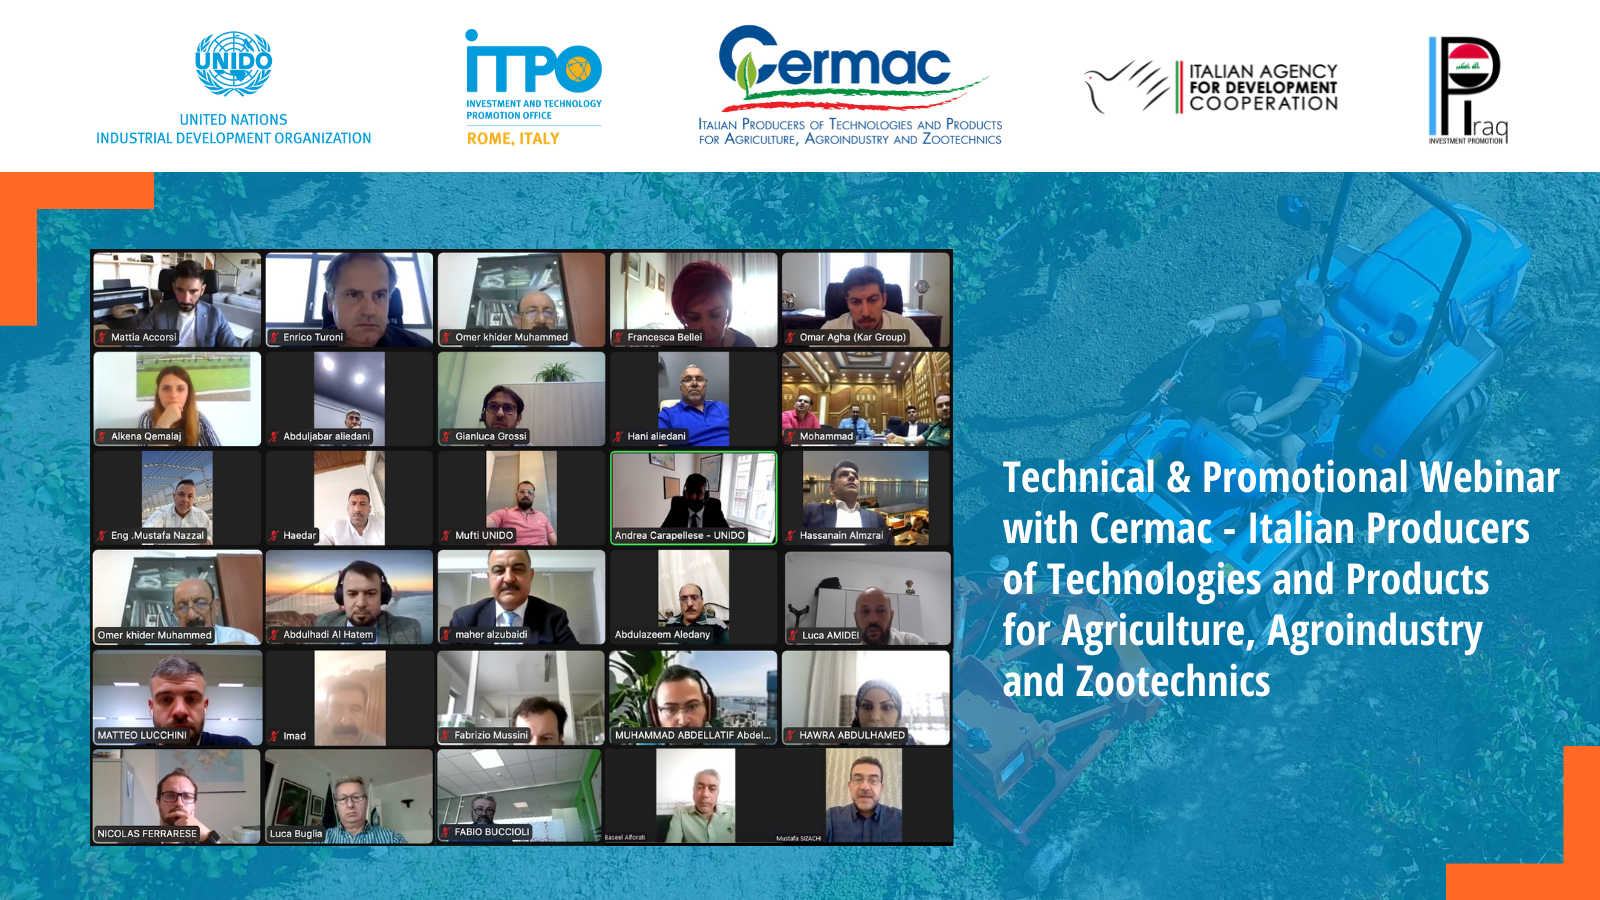 Technical & Promotional Webinar with Cermac